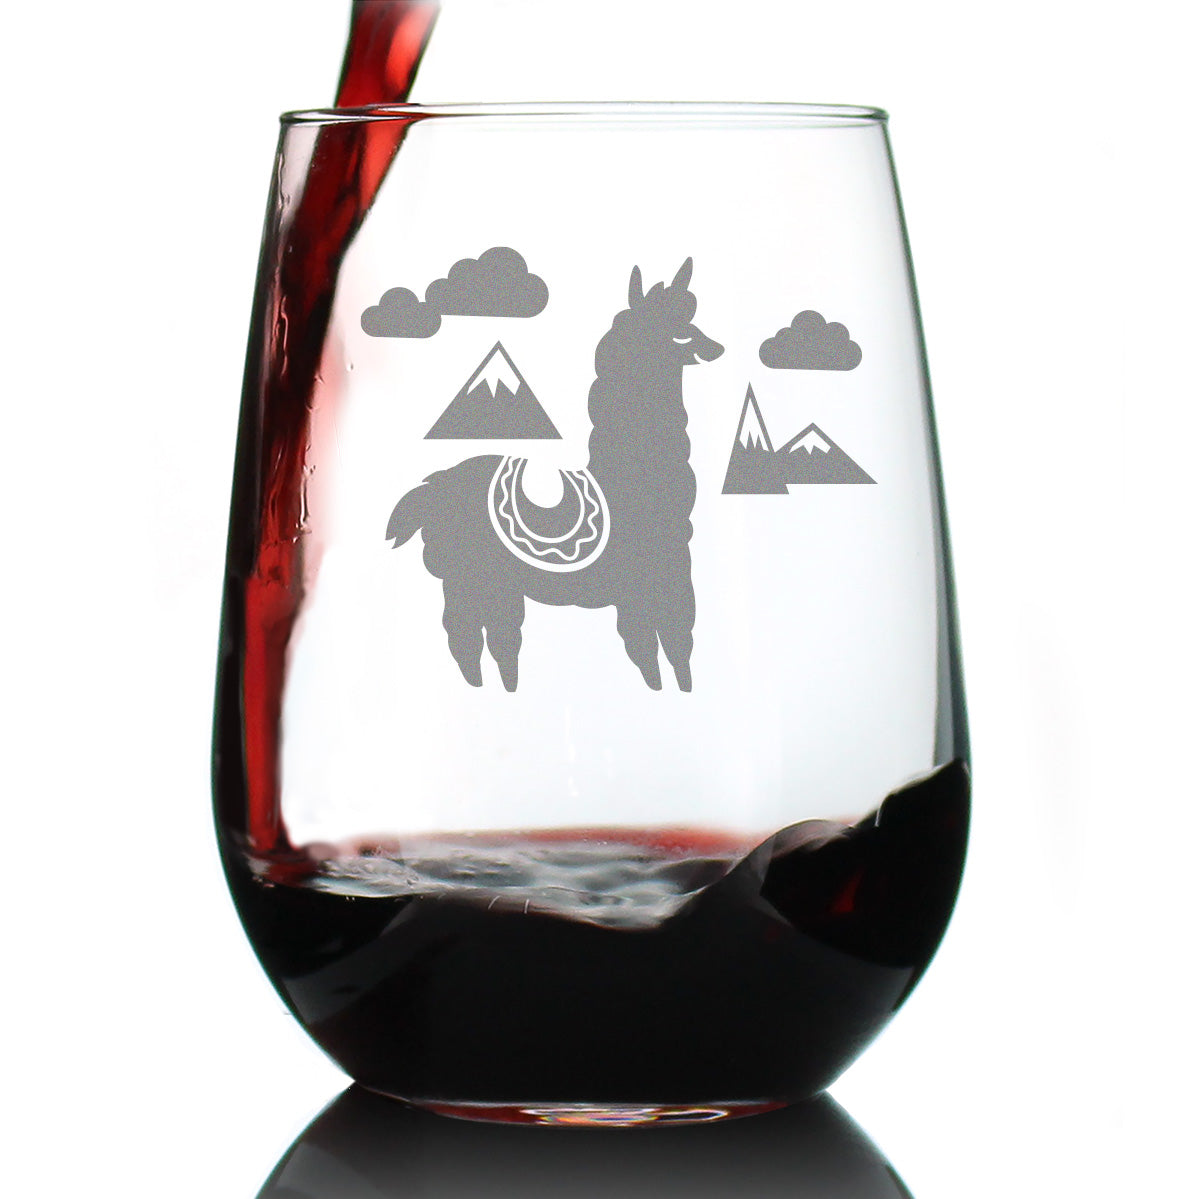 Alpaca Stemless Wine Glass - Cute Funny Themed Decor and Gifts for Alpaca Lovers - Large 17 Oz